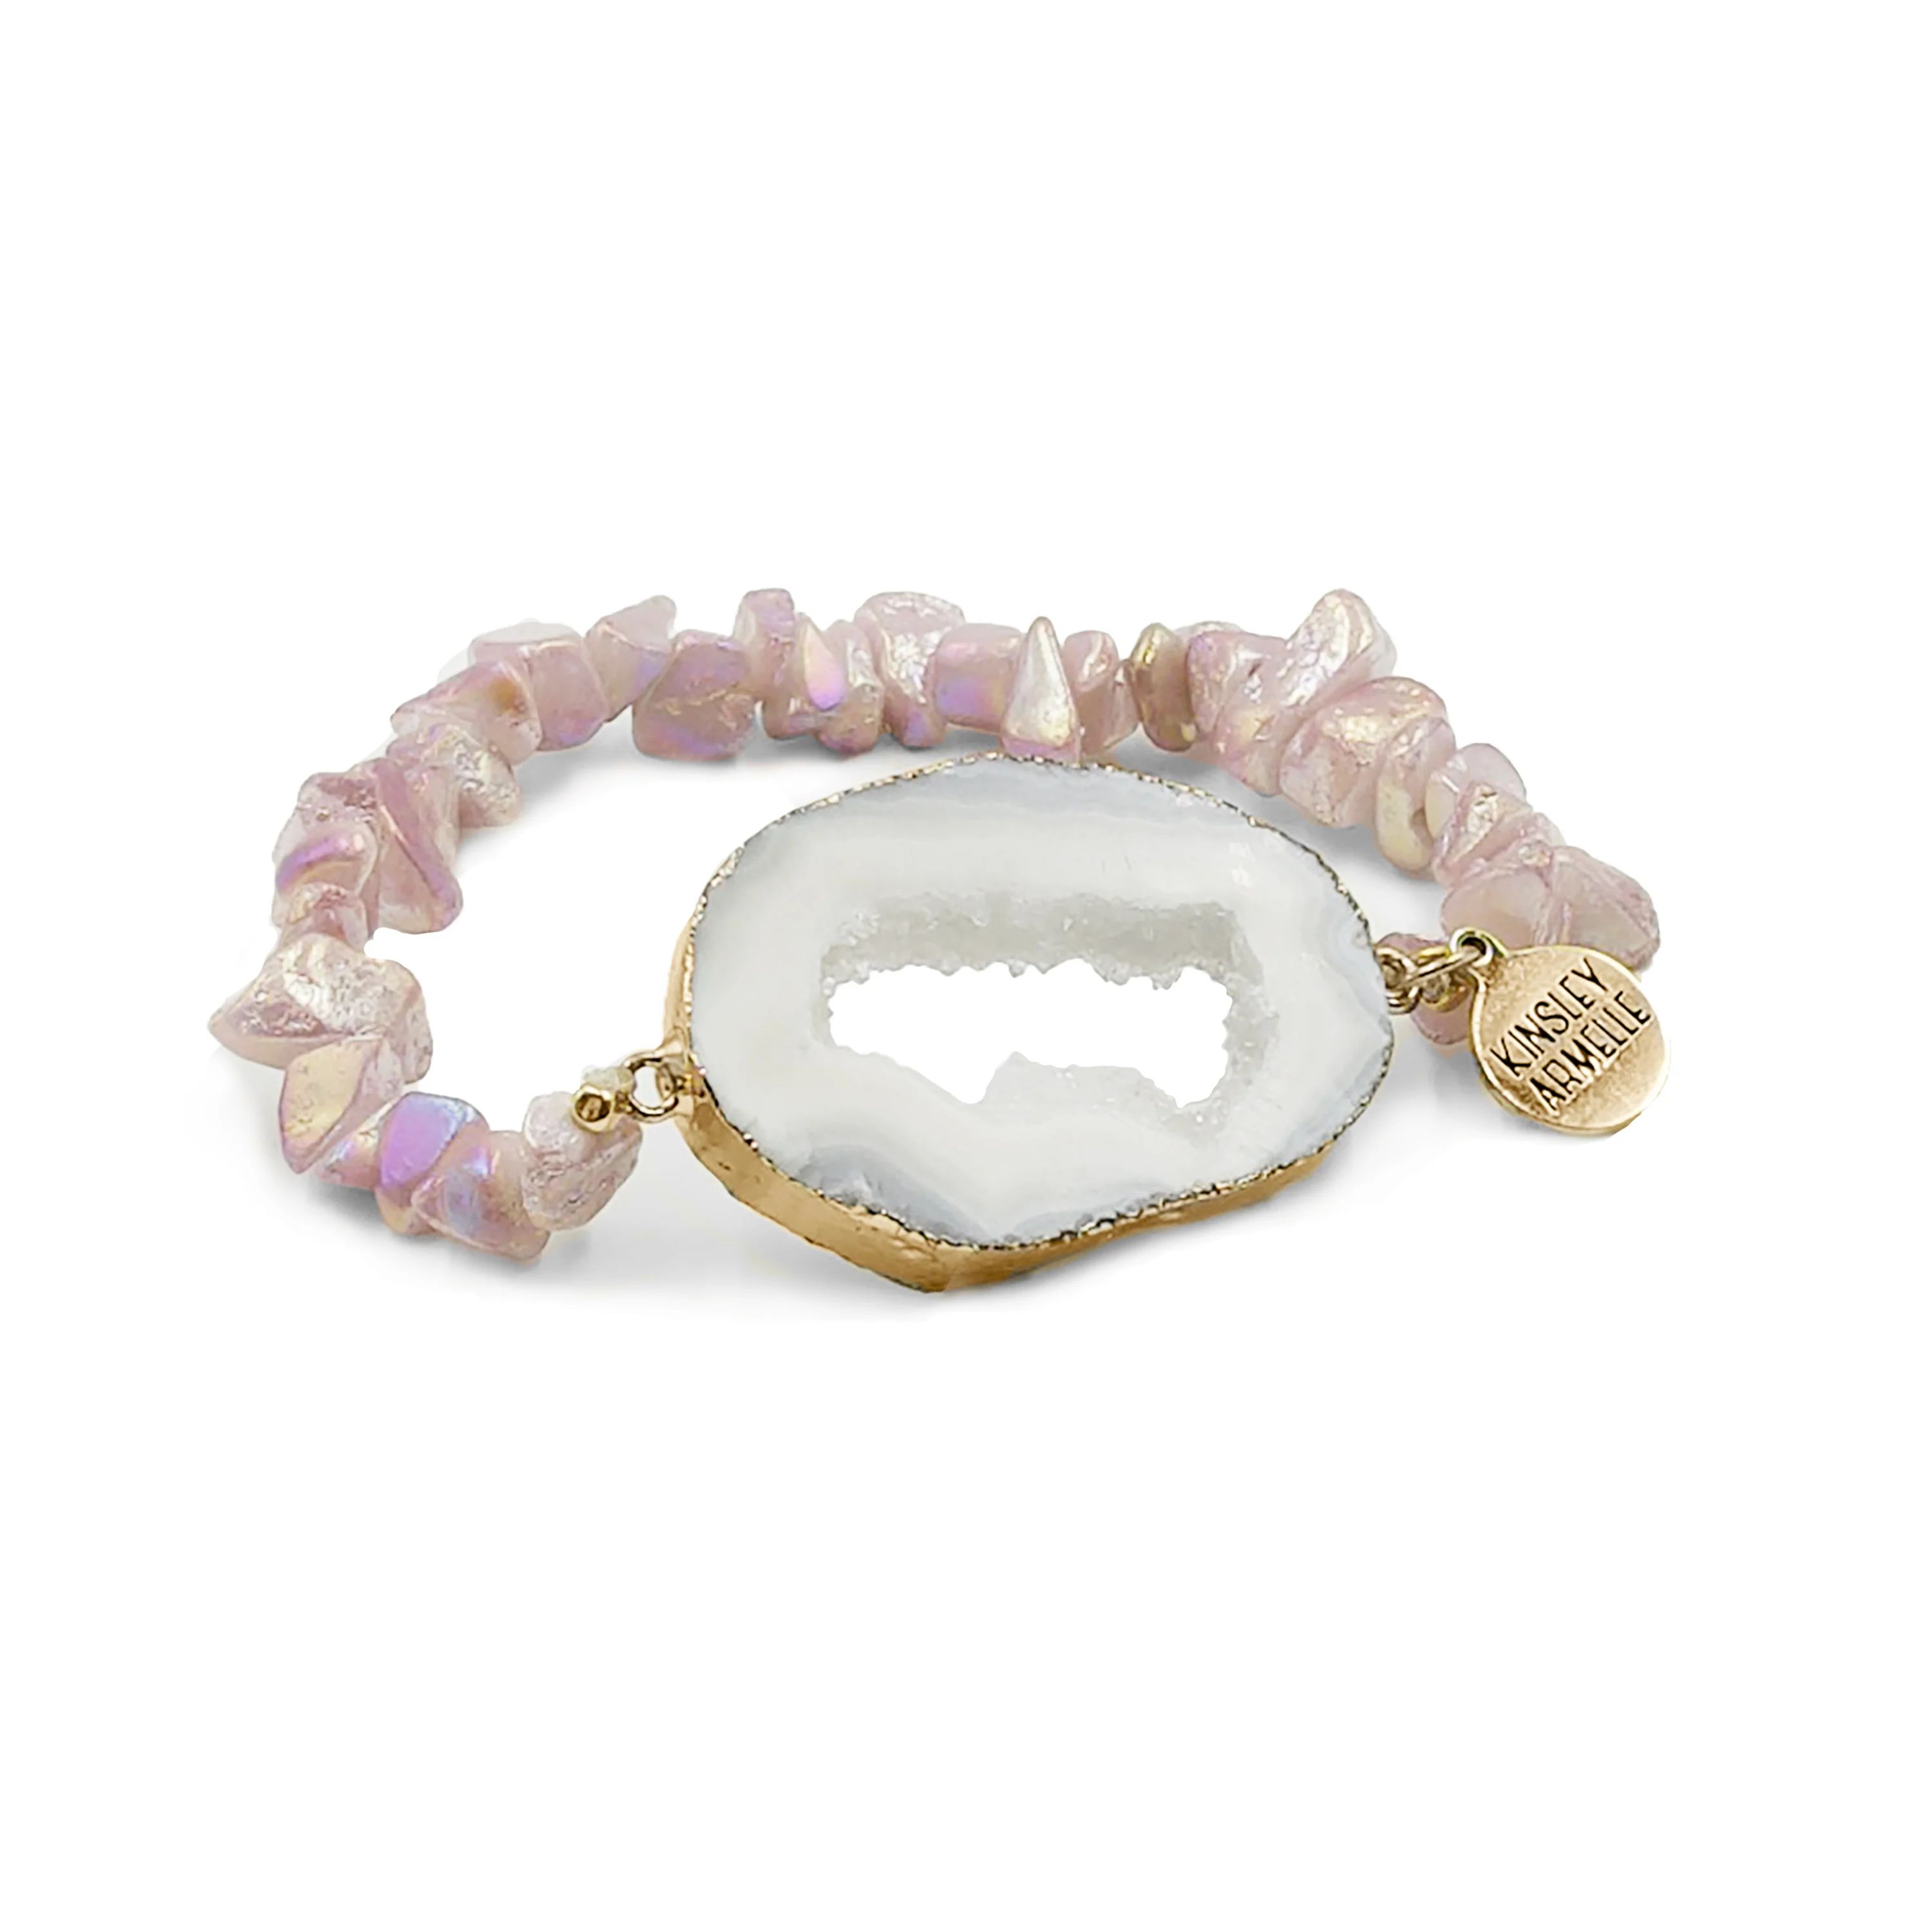 Agate Collection | Kinsley Armelle